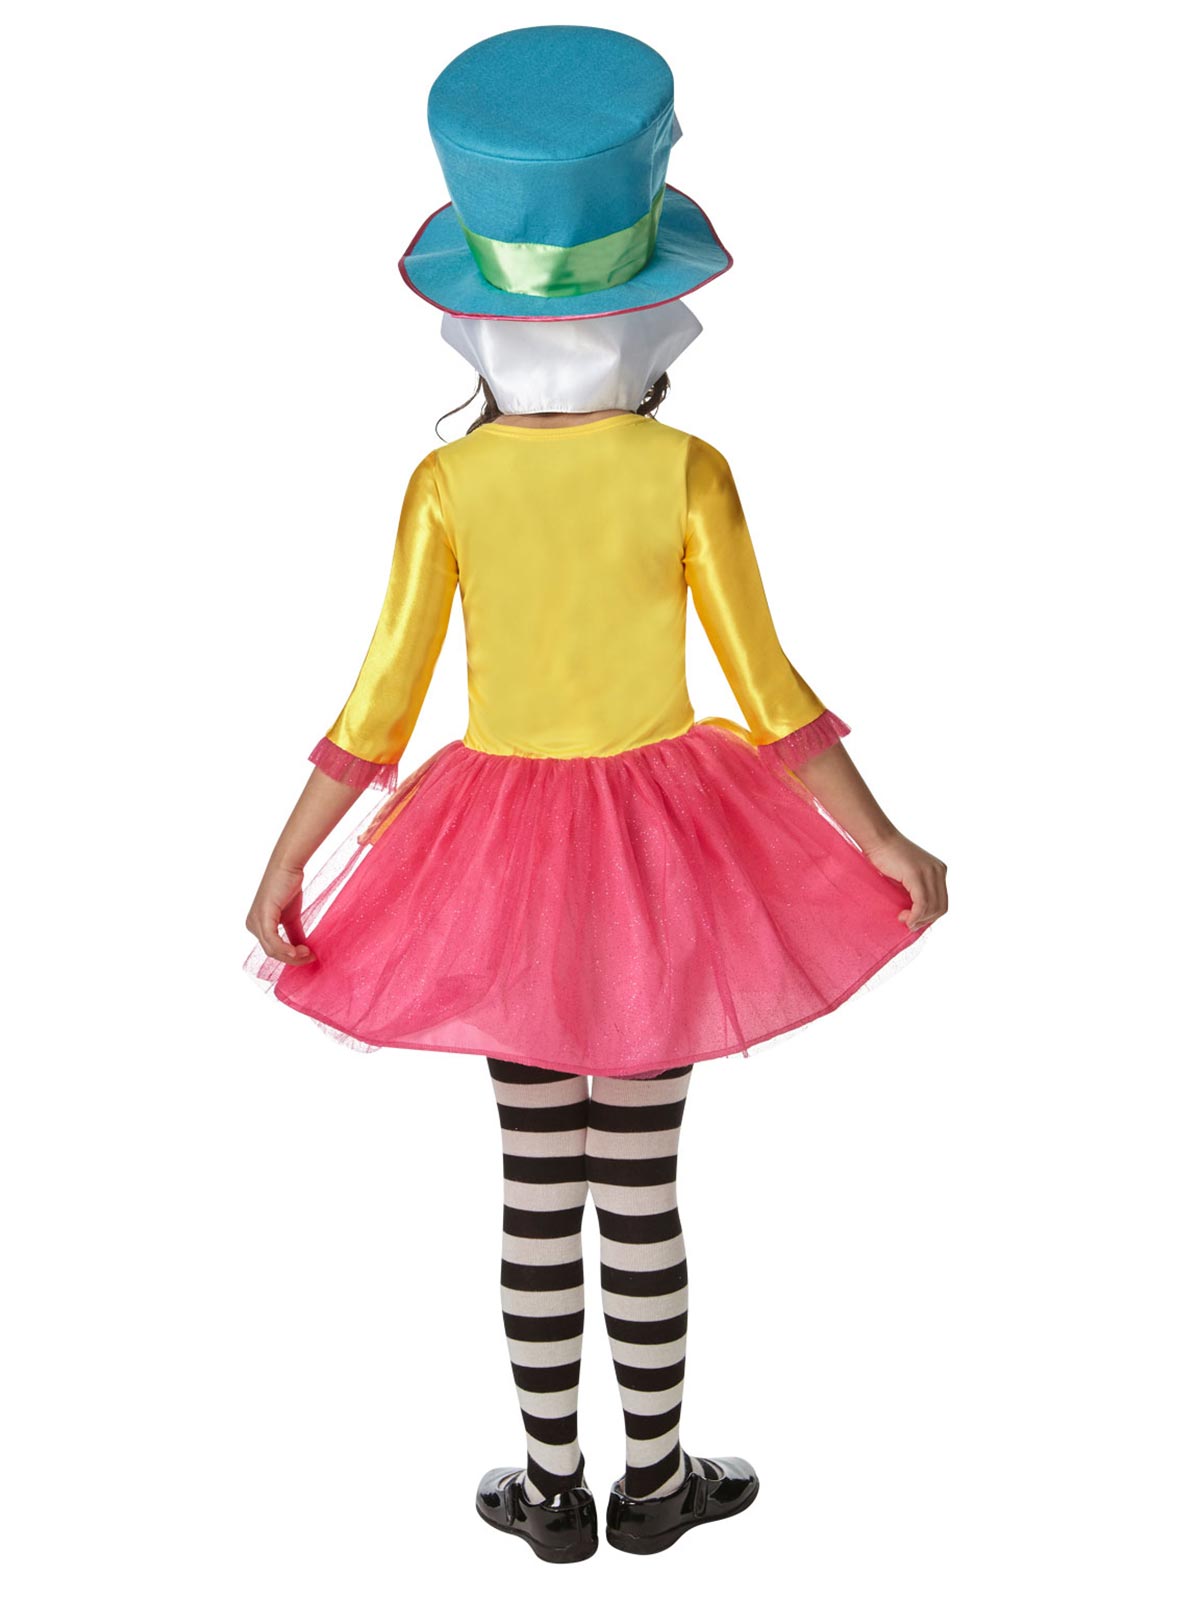 MAD HATTER GIRLS DELUXE CHILD COSTUME